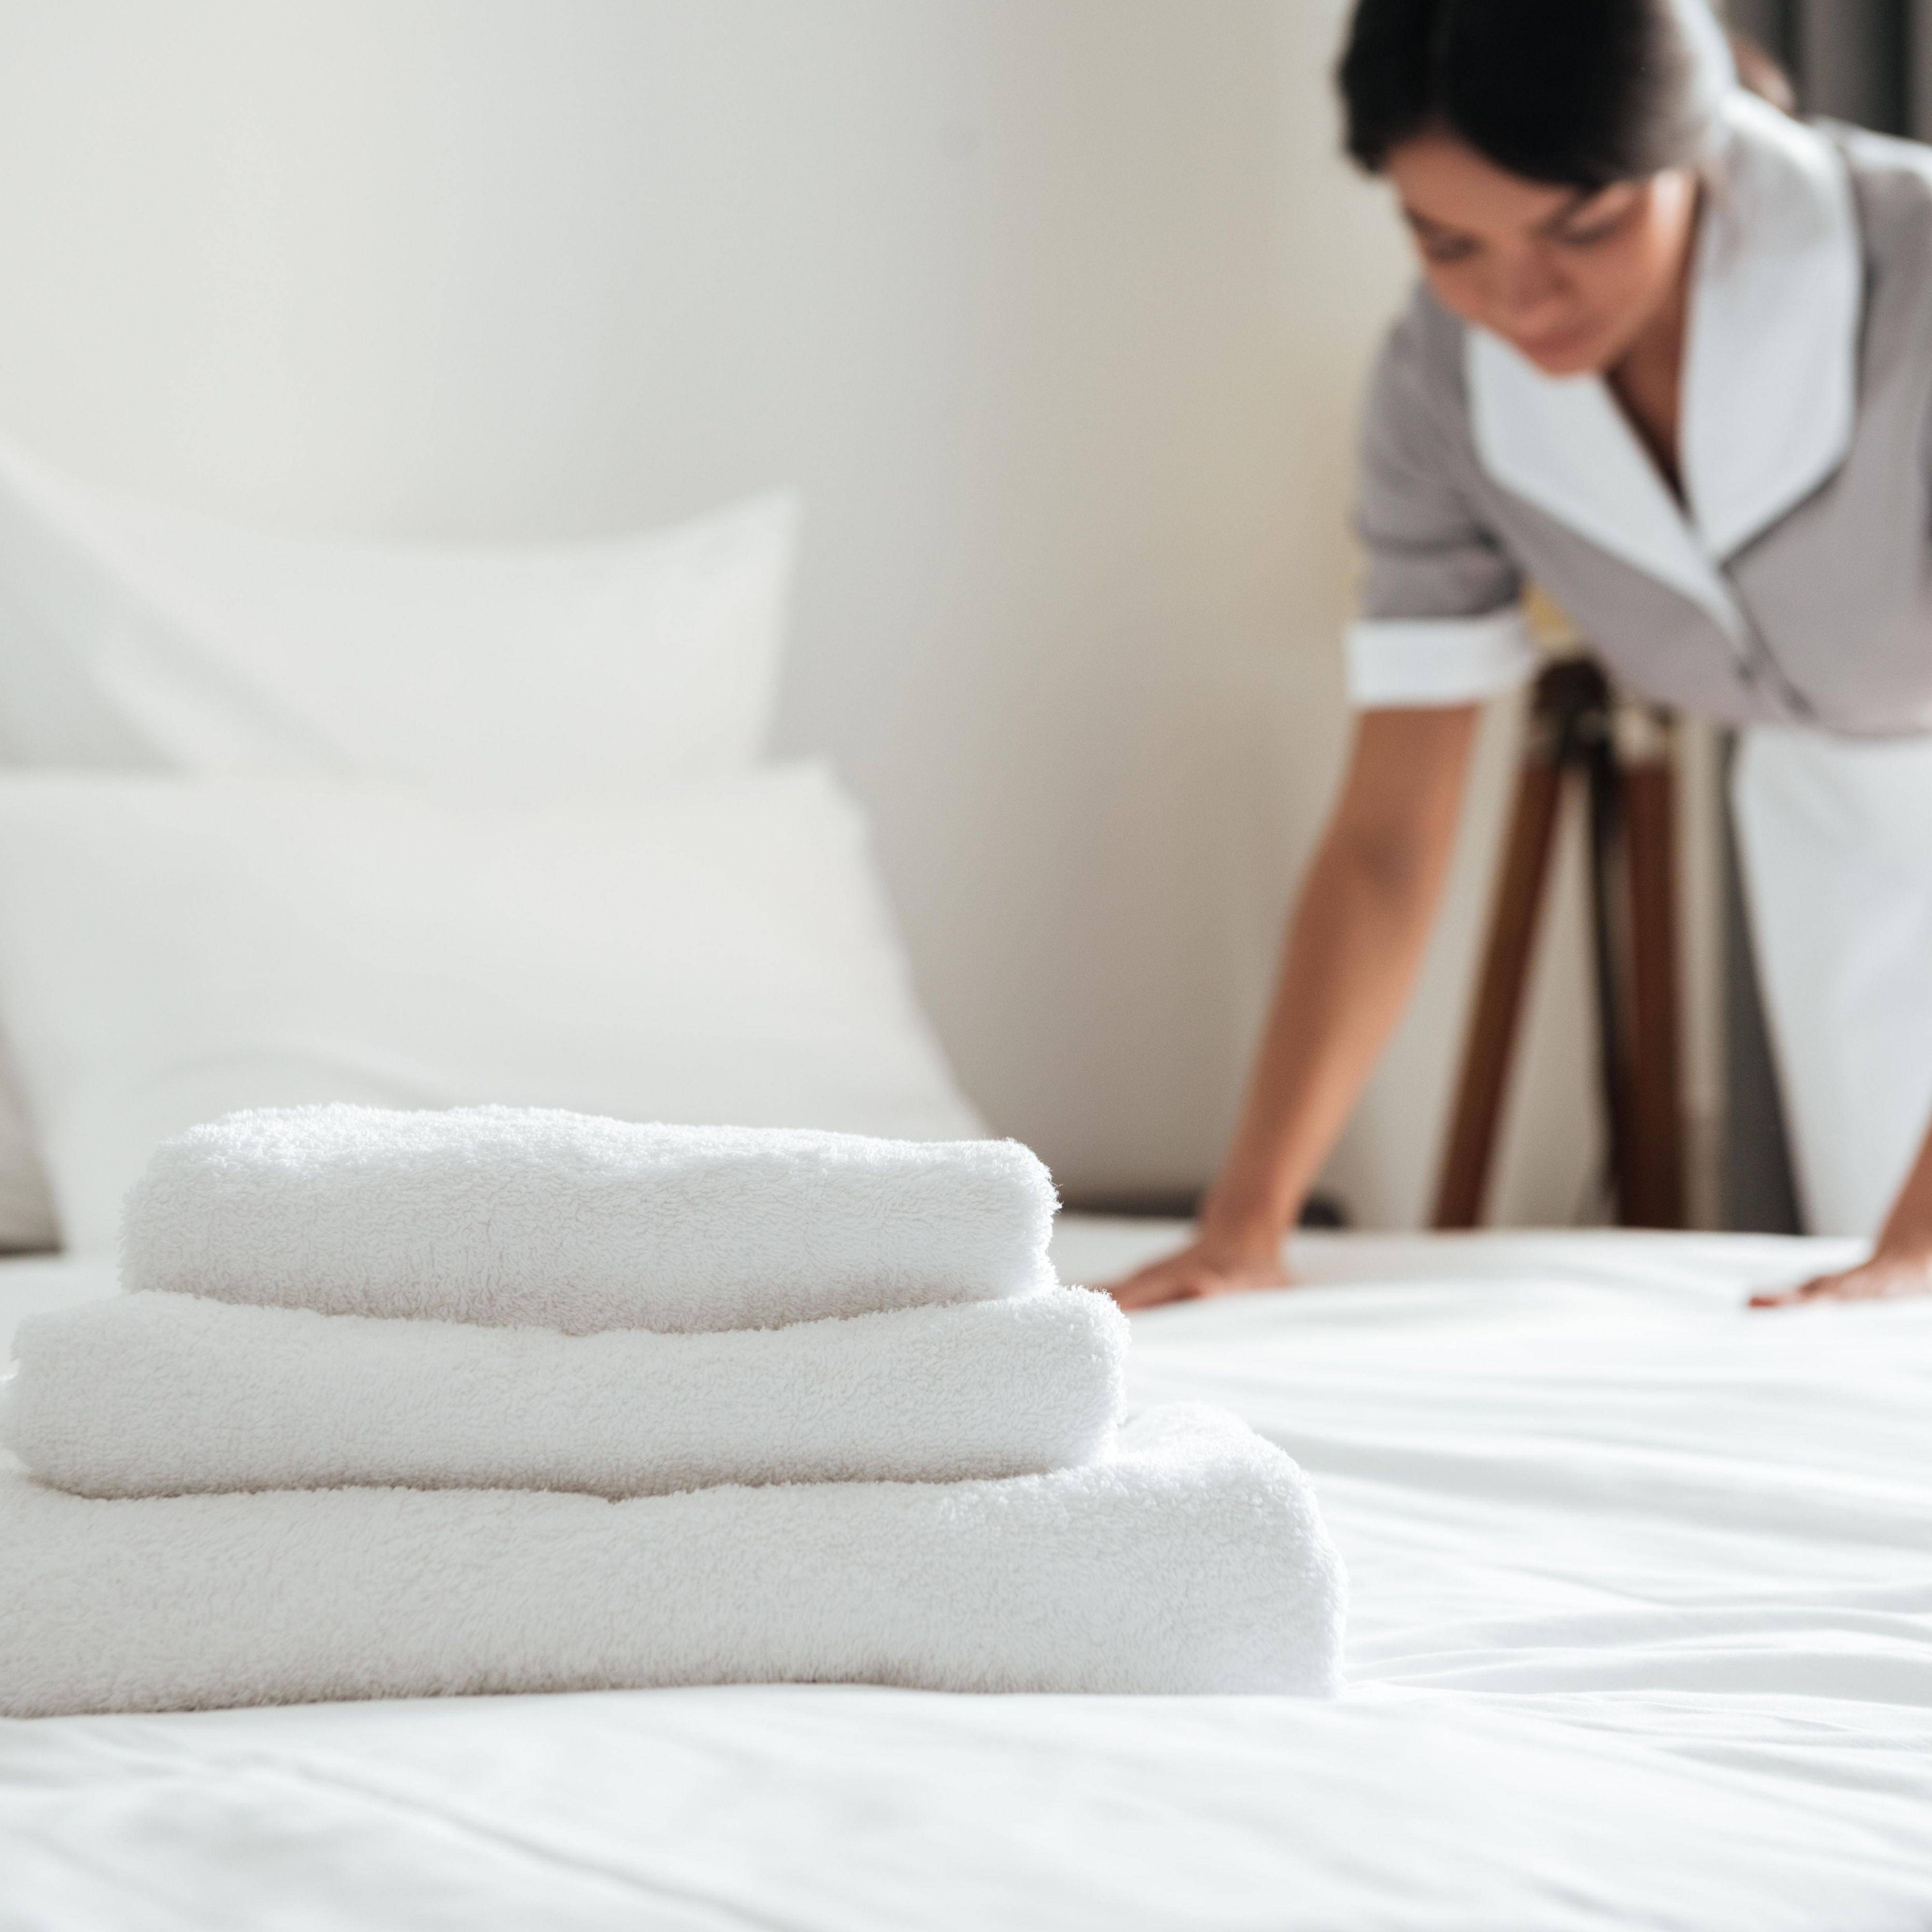 A dedicated team to ensure your comfort throughout your stay